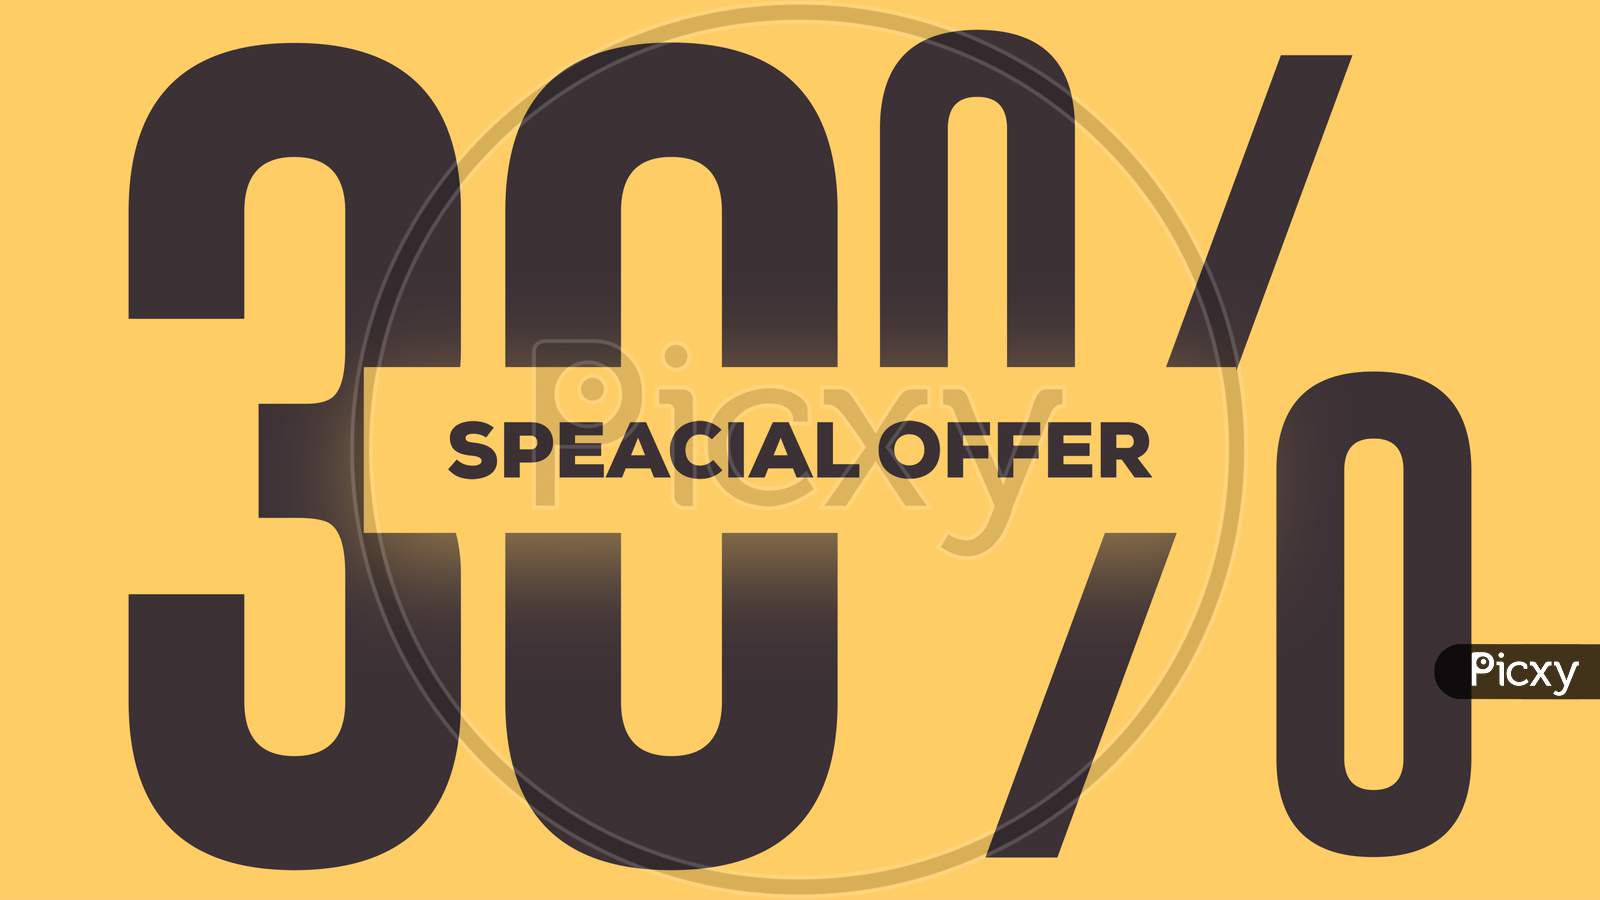 Speacial Offer 30% Off Illustration Use For Landing Page,Website, Poster, Banner, Flyer, Background,Label, Wallpaper,Sale Promotion,Advertising, Marketing On Yellow Background